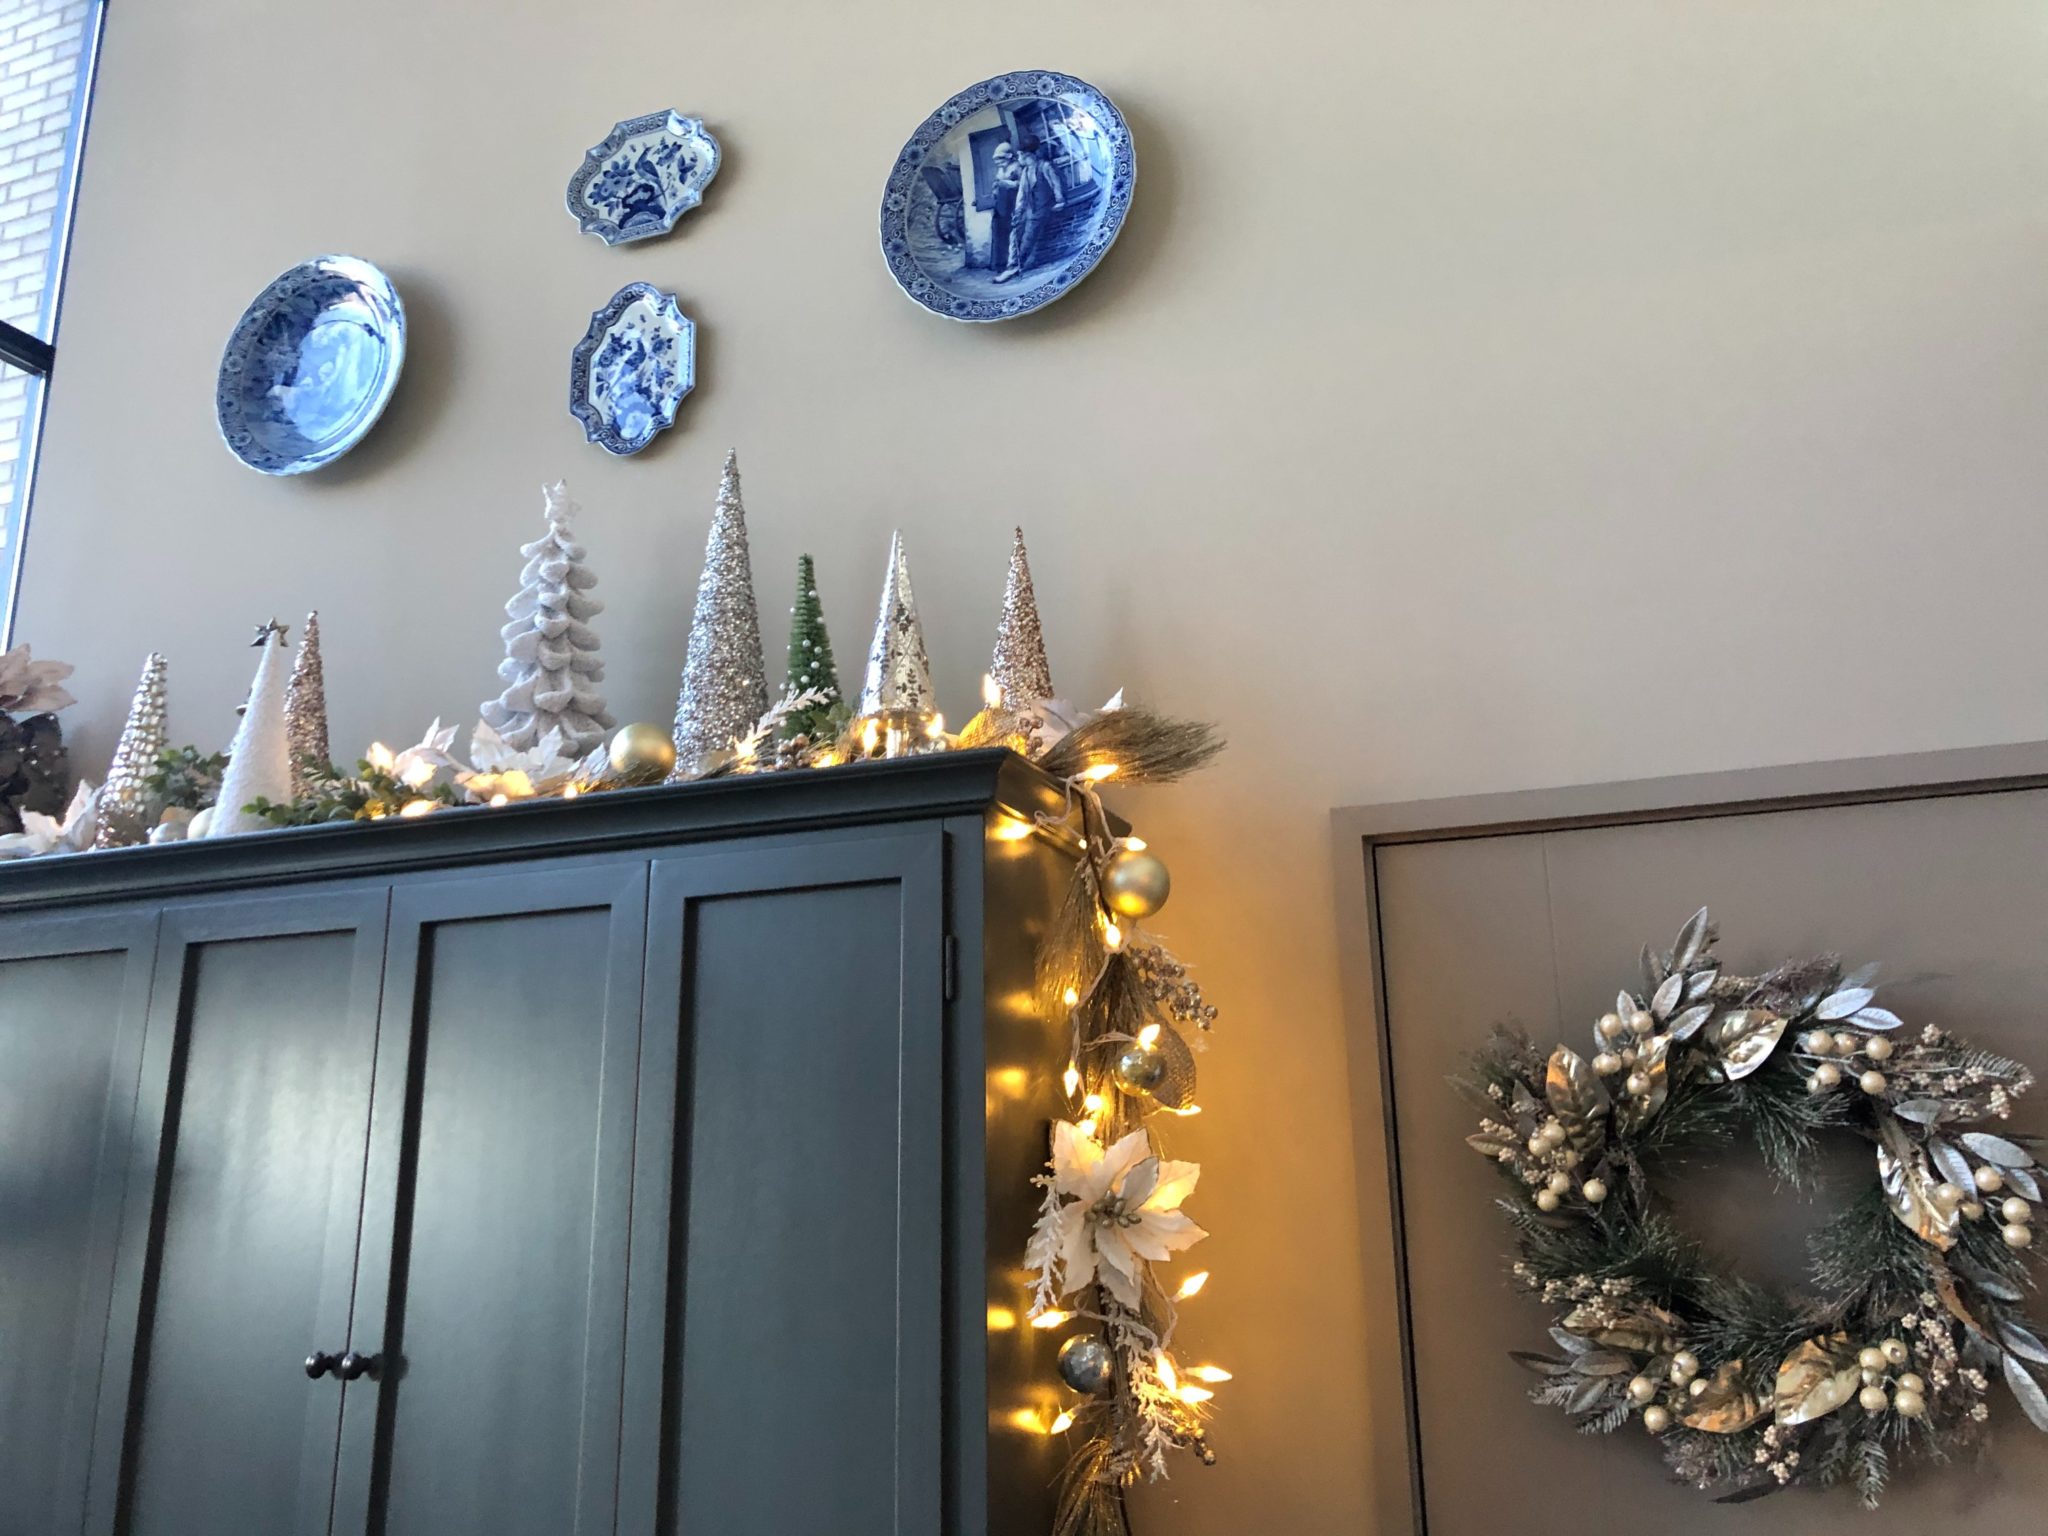 Christmas lights and decor on a dark cabinet